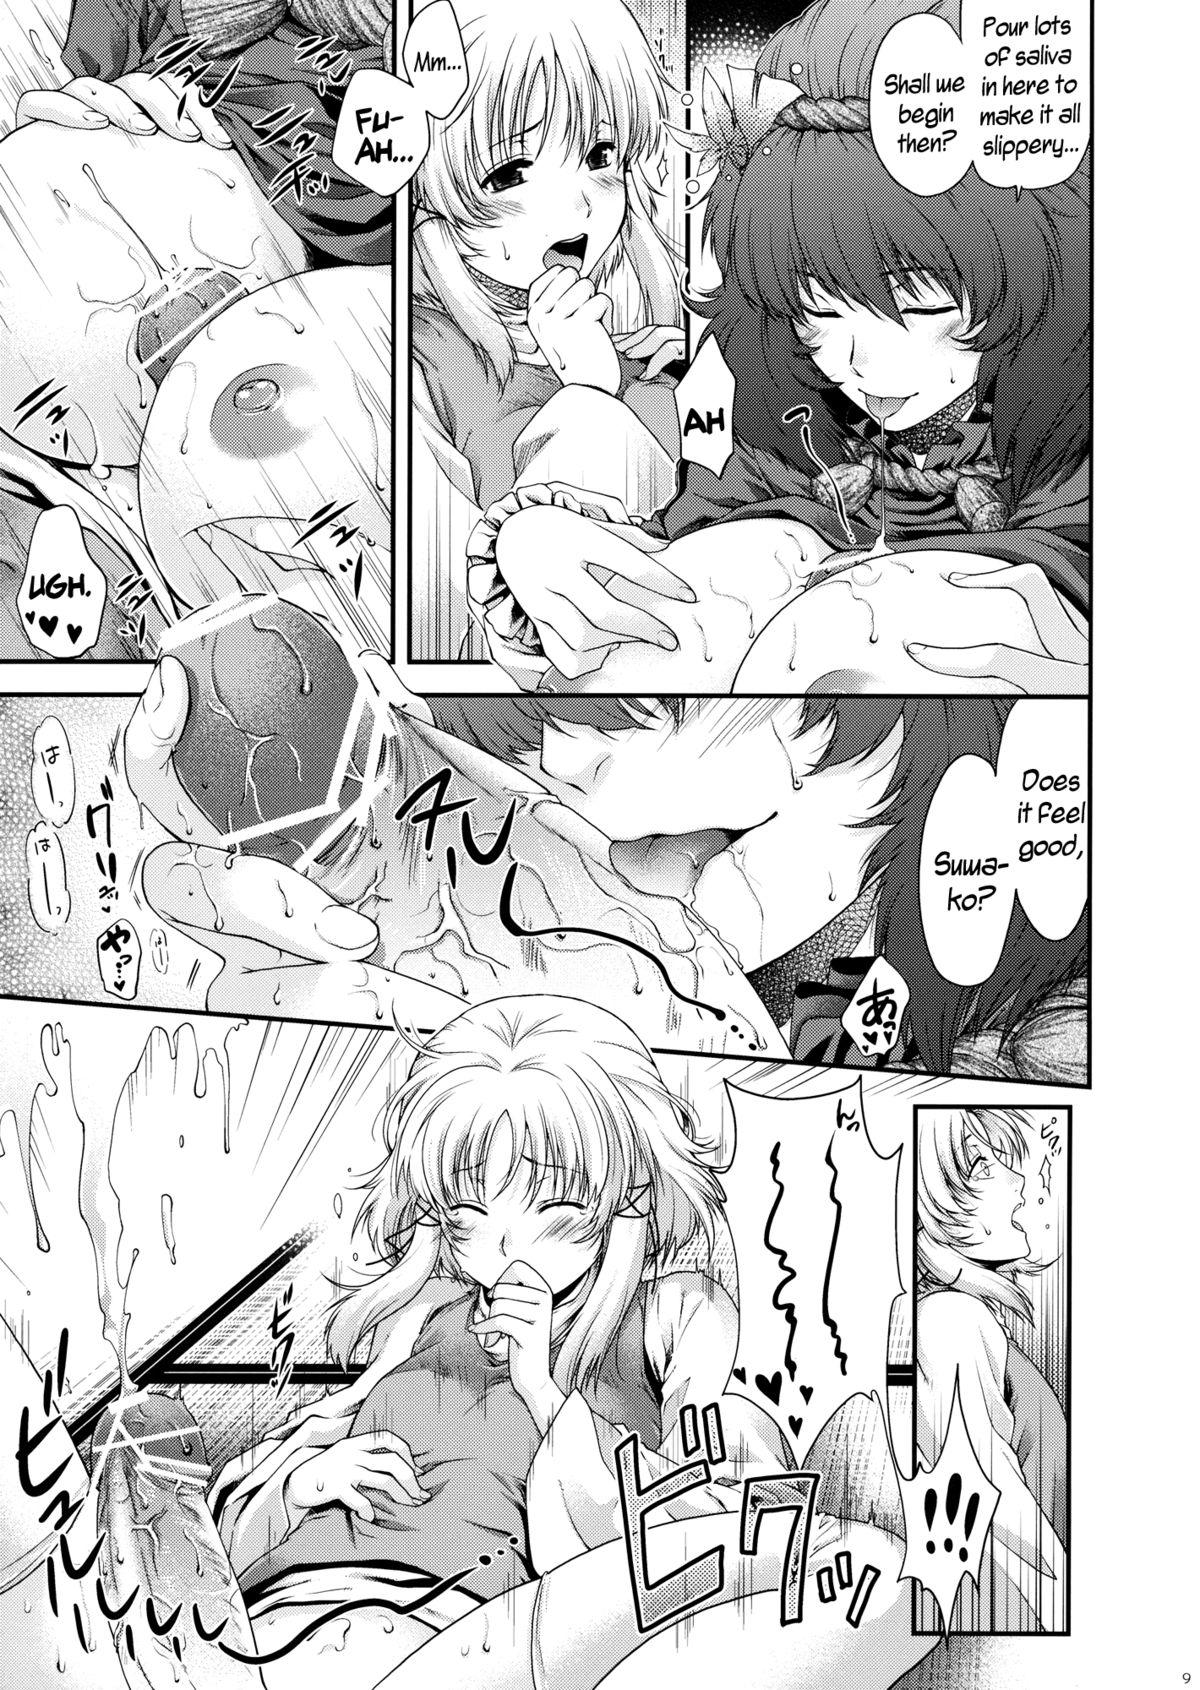 Class Room SKB48 - Touhou project Punishment - Page 9